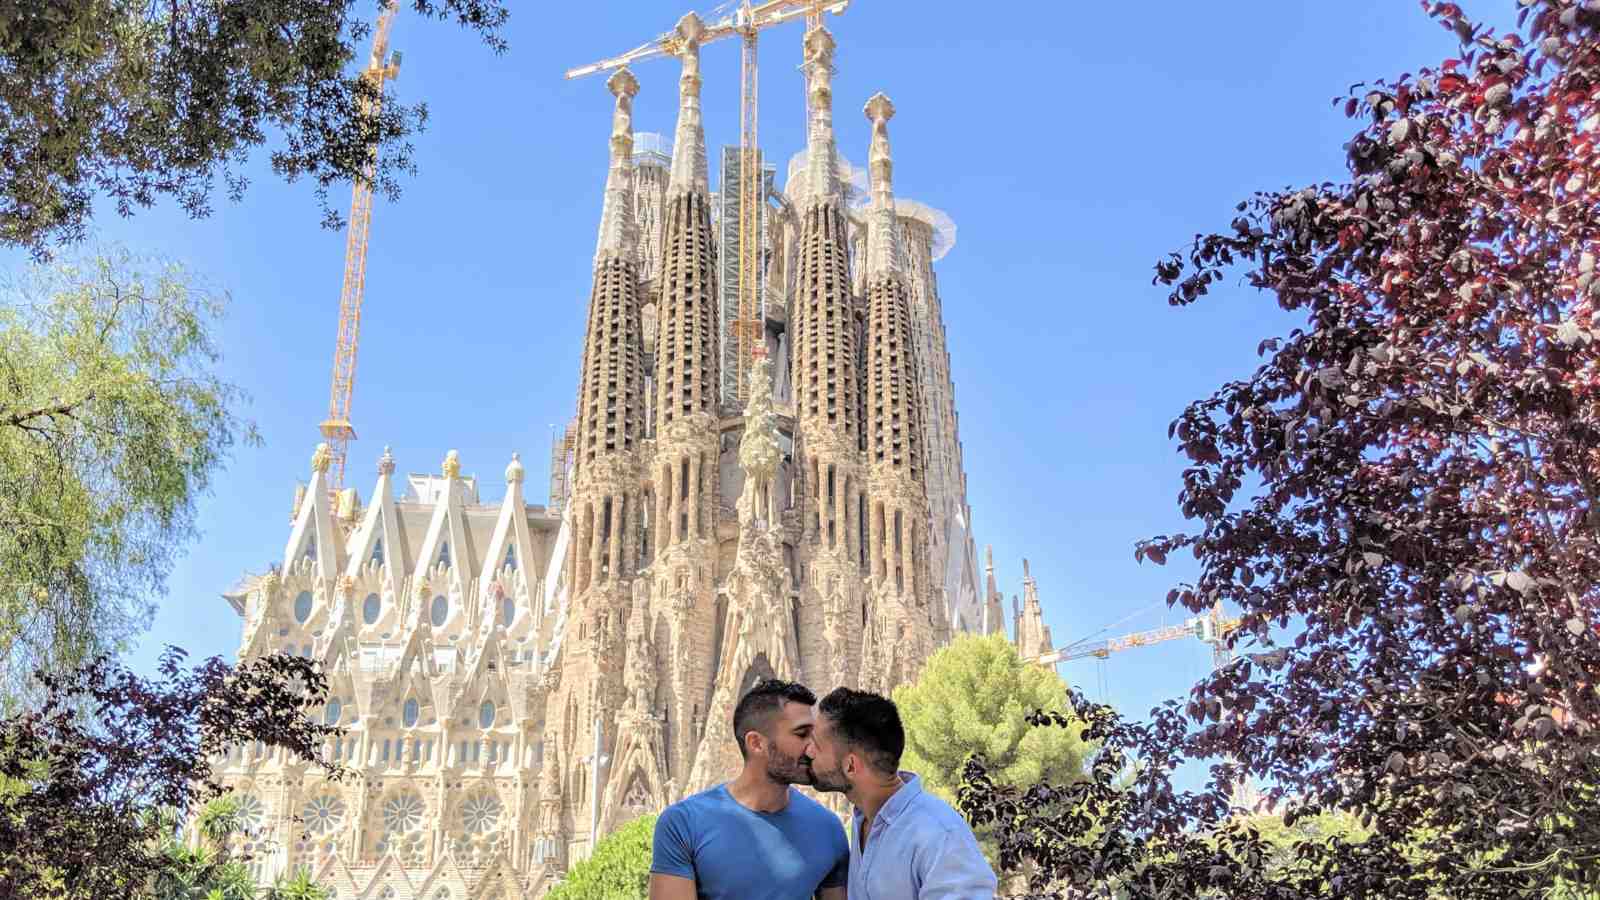 Barcelona is an incredibly beautiful city that's one of the best gay vacation spots in the world